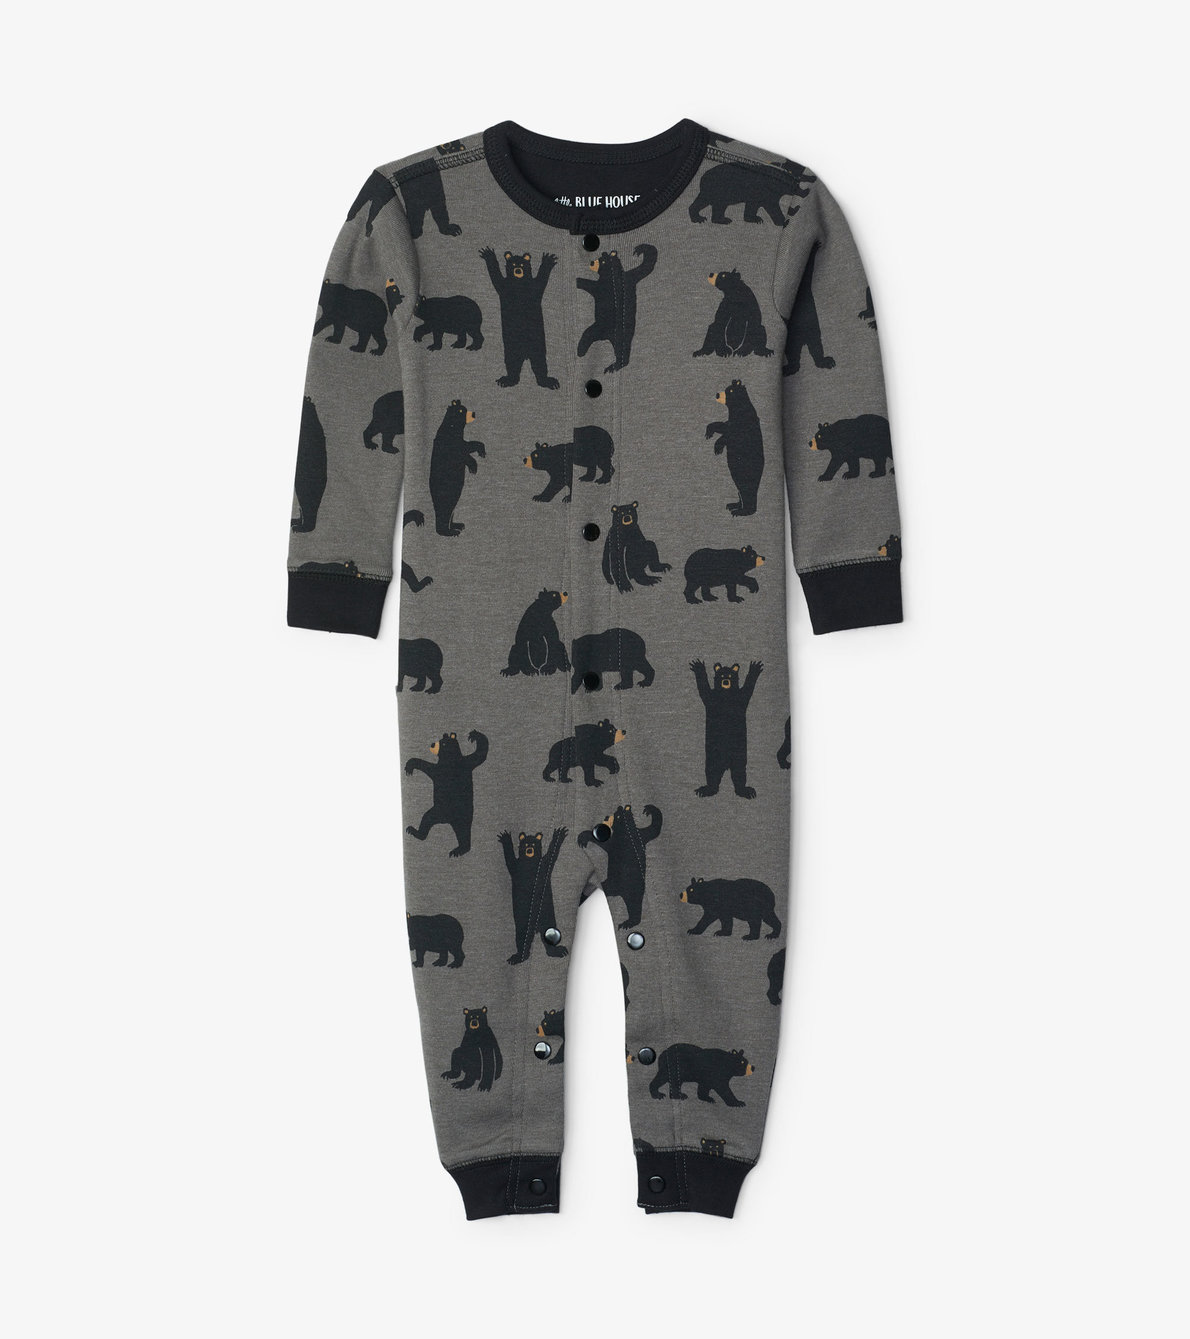 View larger image of Charcoal Bears Baby Union Suit